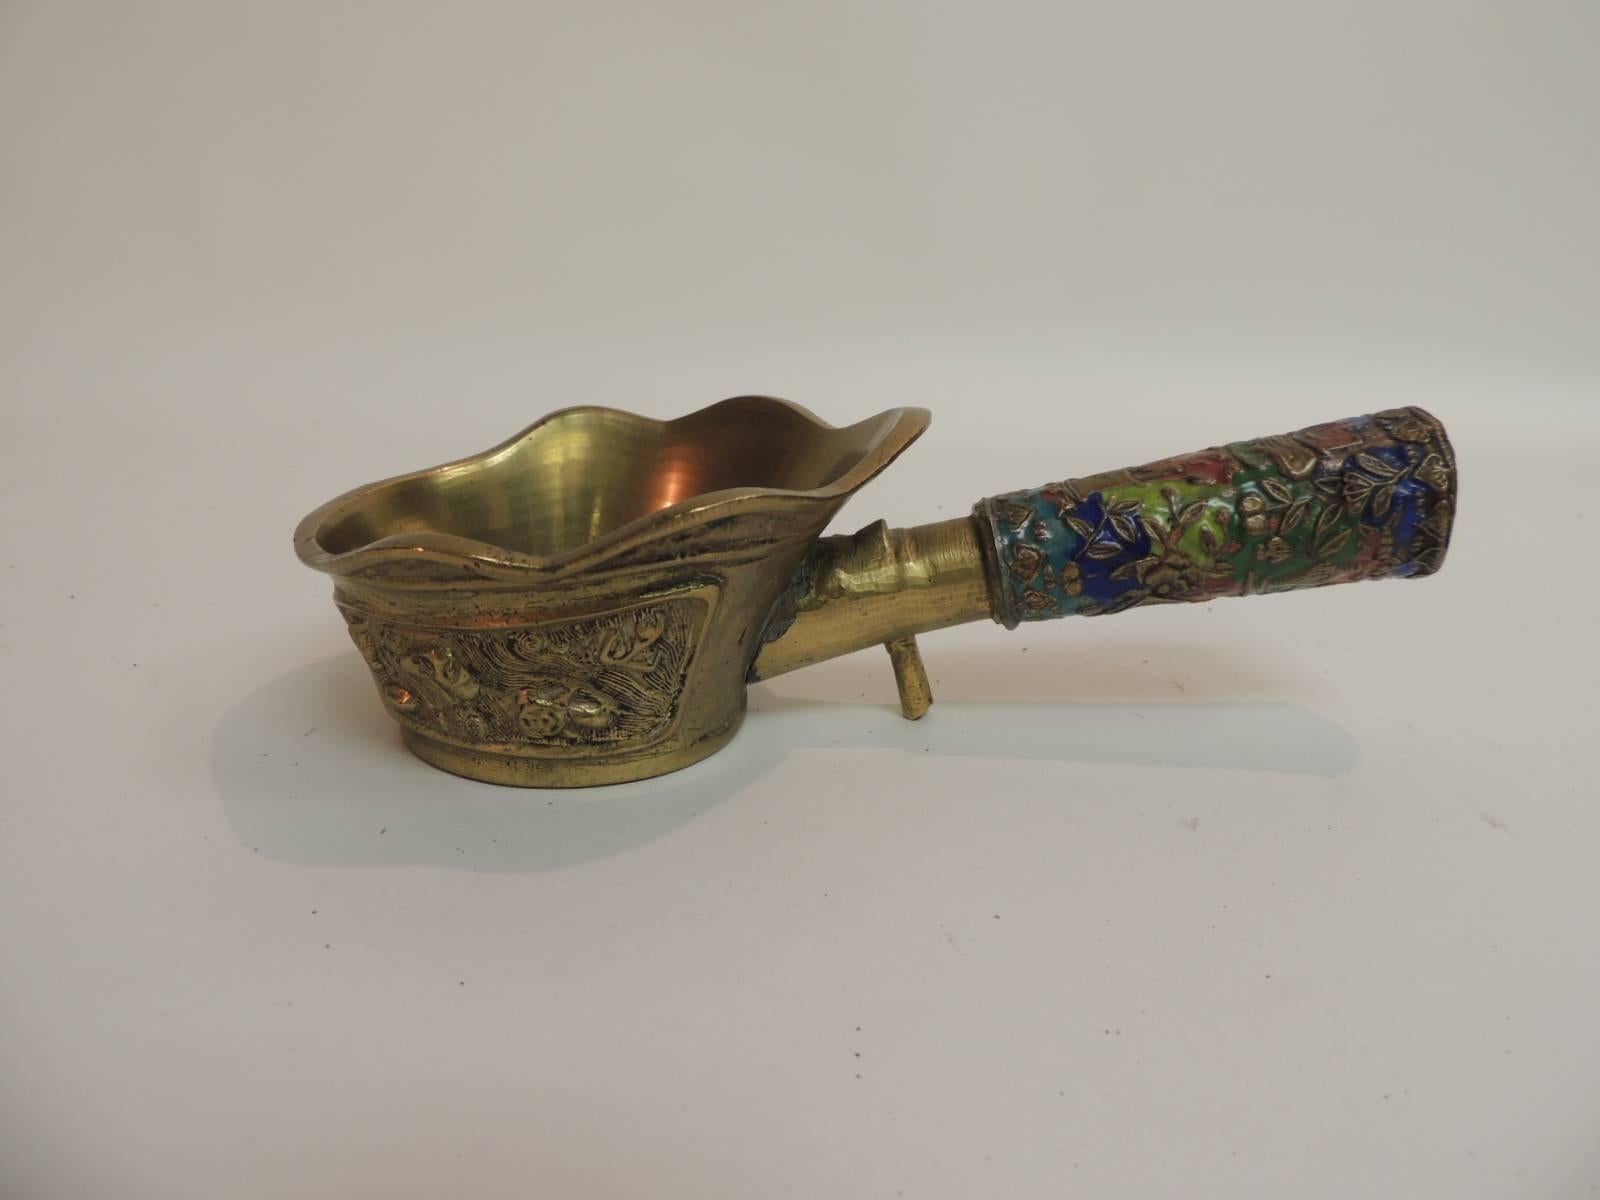 Vintage Asian cloisonné and brass silk iron embellished with a colorful handle depicting vases,
flowers, fruits and birds. Repousse intricate details on the water vessel and stamped.
Size: 2